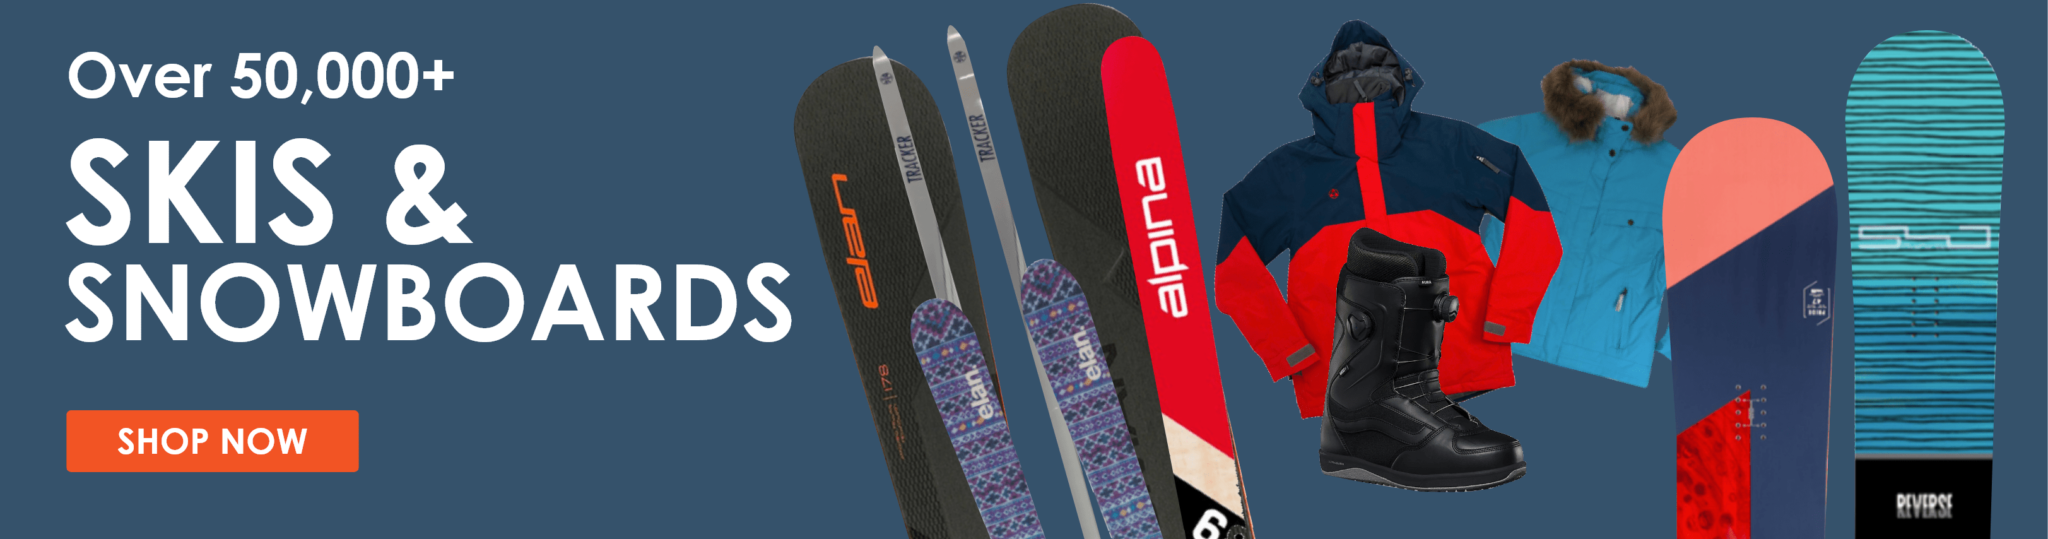 SKIS and SNOWBOARDS SHOP NOW